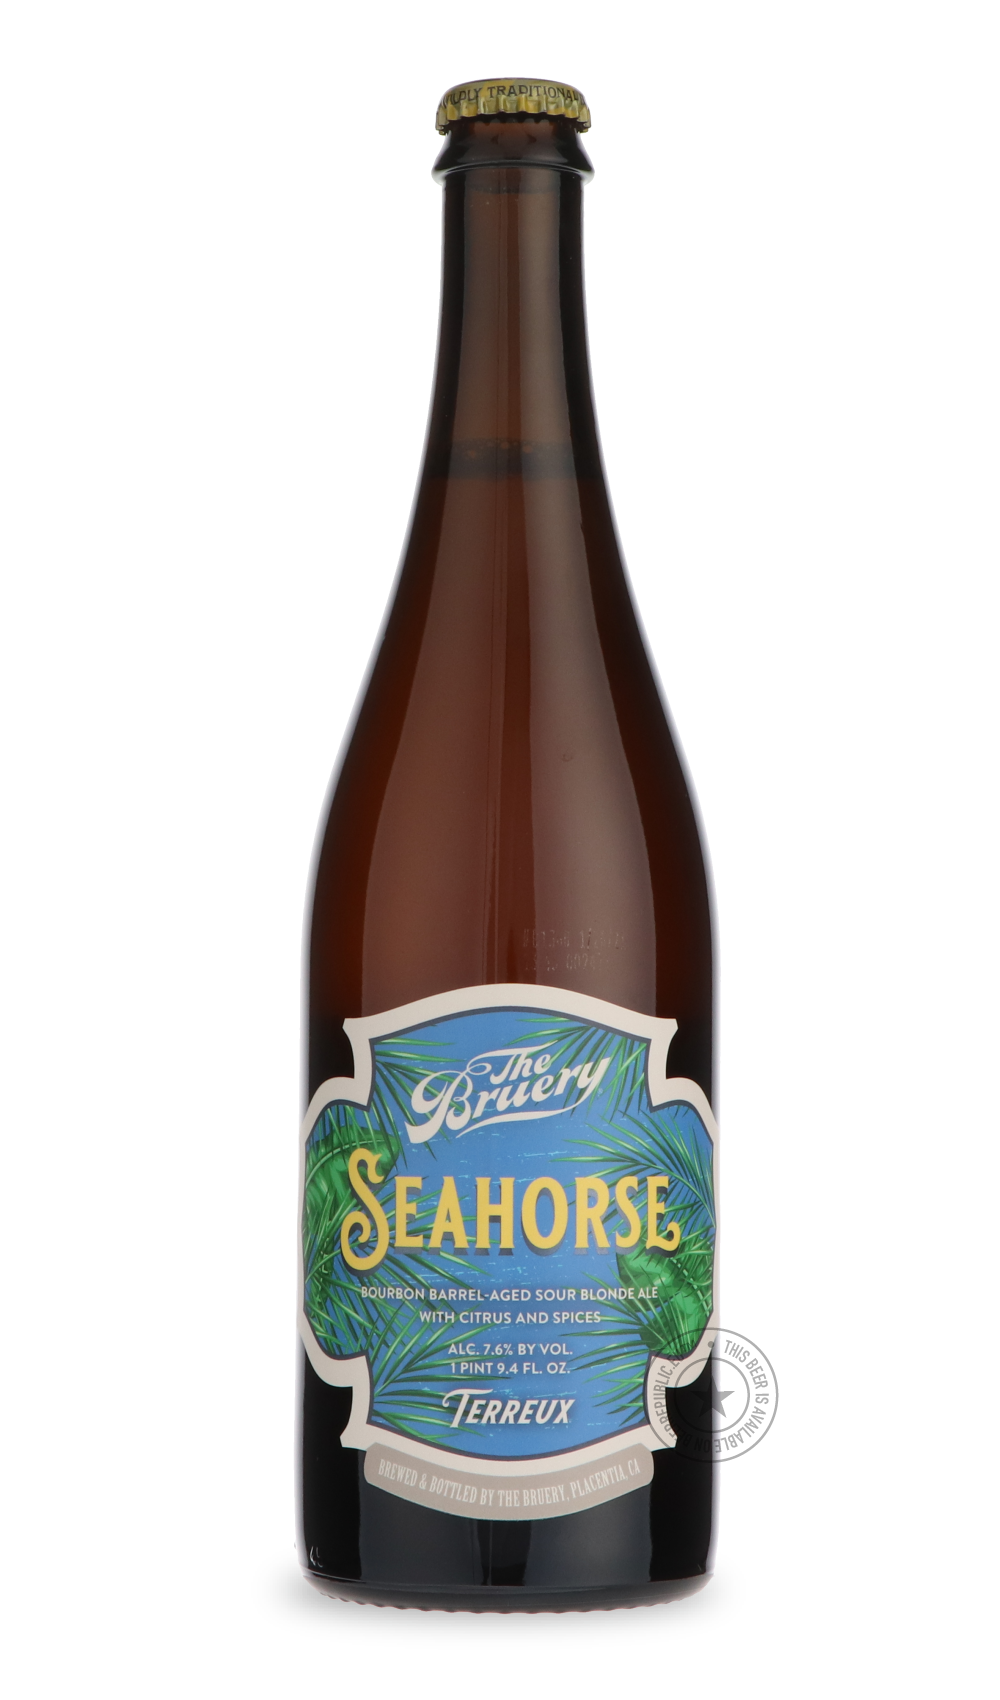 -The Bruery- Seahorse-Sour / Wild & Fruity- Only @ Beer Republic - The best online beer store for American & Canadian craft beer - Buy beer online from the USA and Canada - Bier online kopen - Amerikaans bier kopen - Craft beer store - Craft beer kopen - Amerikanisch bier kaufen - Bier online kaufen - Acheter biere online - IPA - Stout - Porter - New England IPA - Hazy IPA - Imperial Stout - Barrel Aged - Barrel Aged Imperial Stout - Brown - Dark beer - Blond - Blonde - Pilsner - Lager - Wheat - Weizen - Am